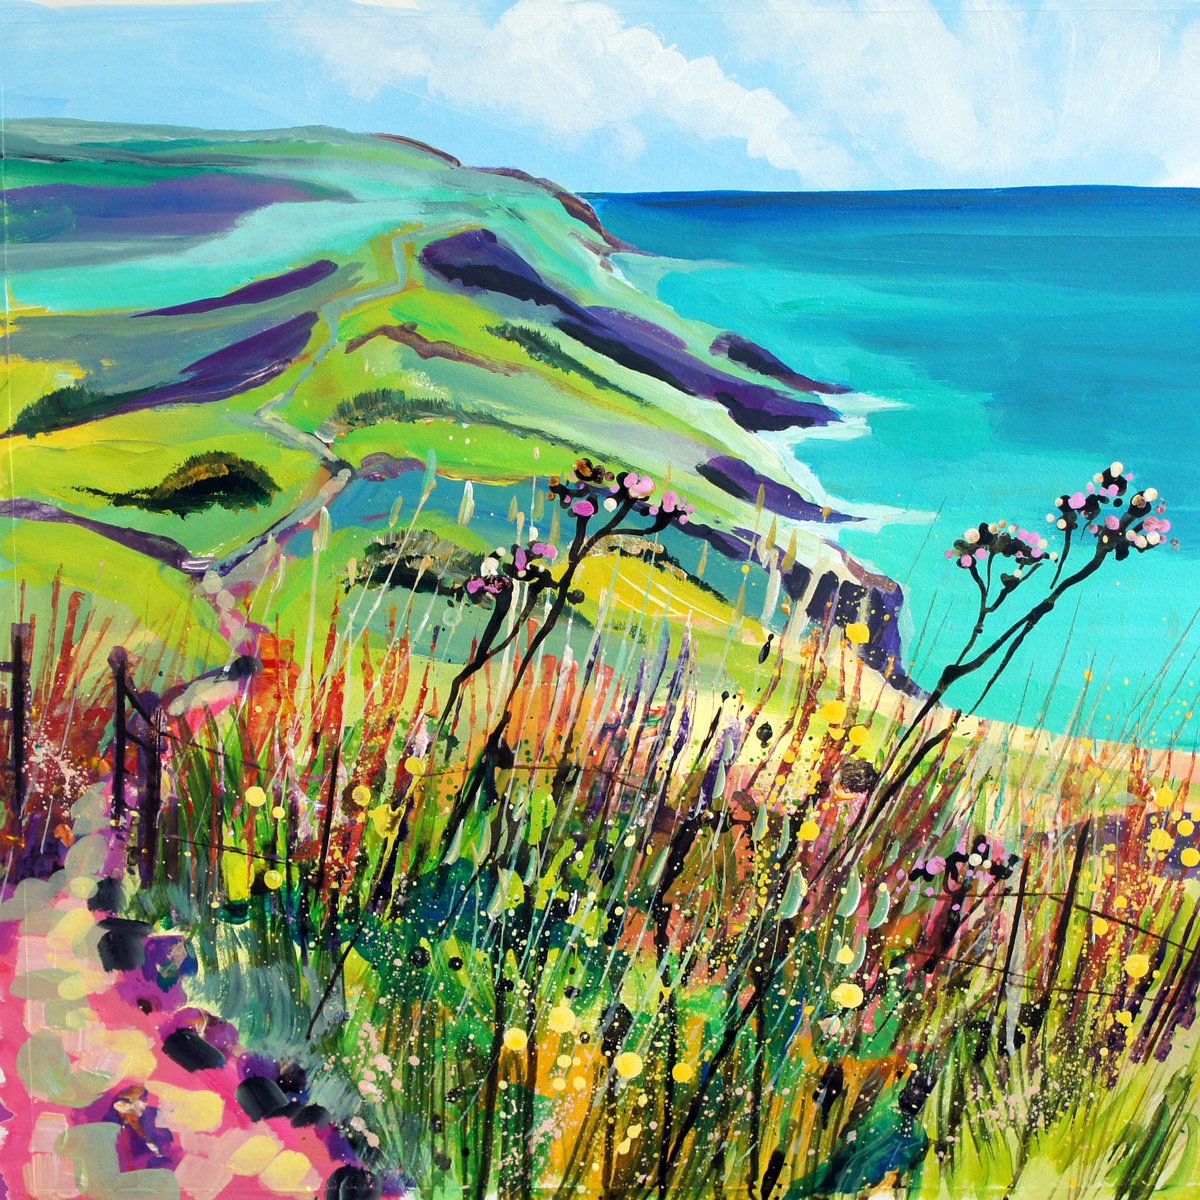 Bolberry Down - Coast Path to Soar Mill Cove by Julia Rigby